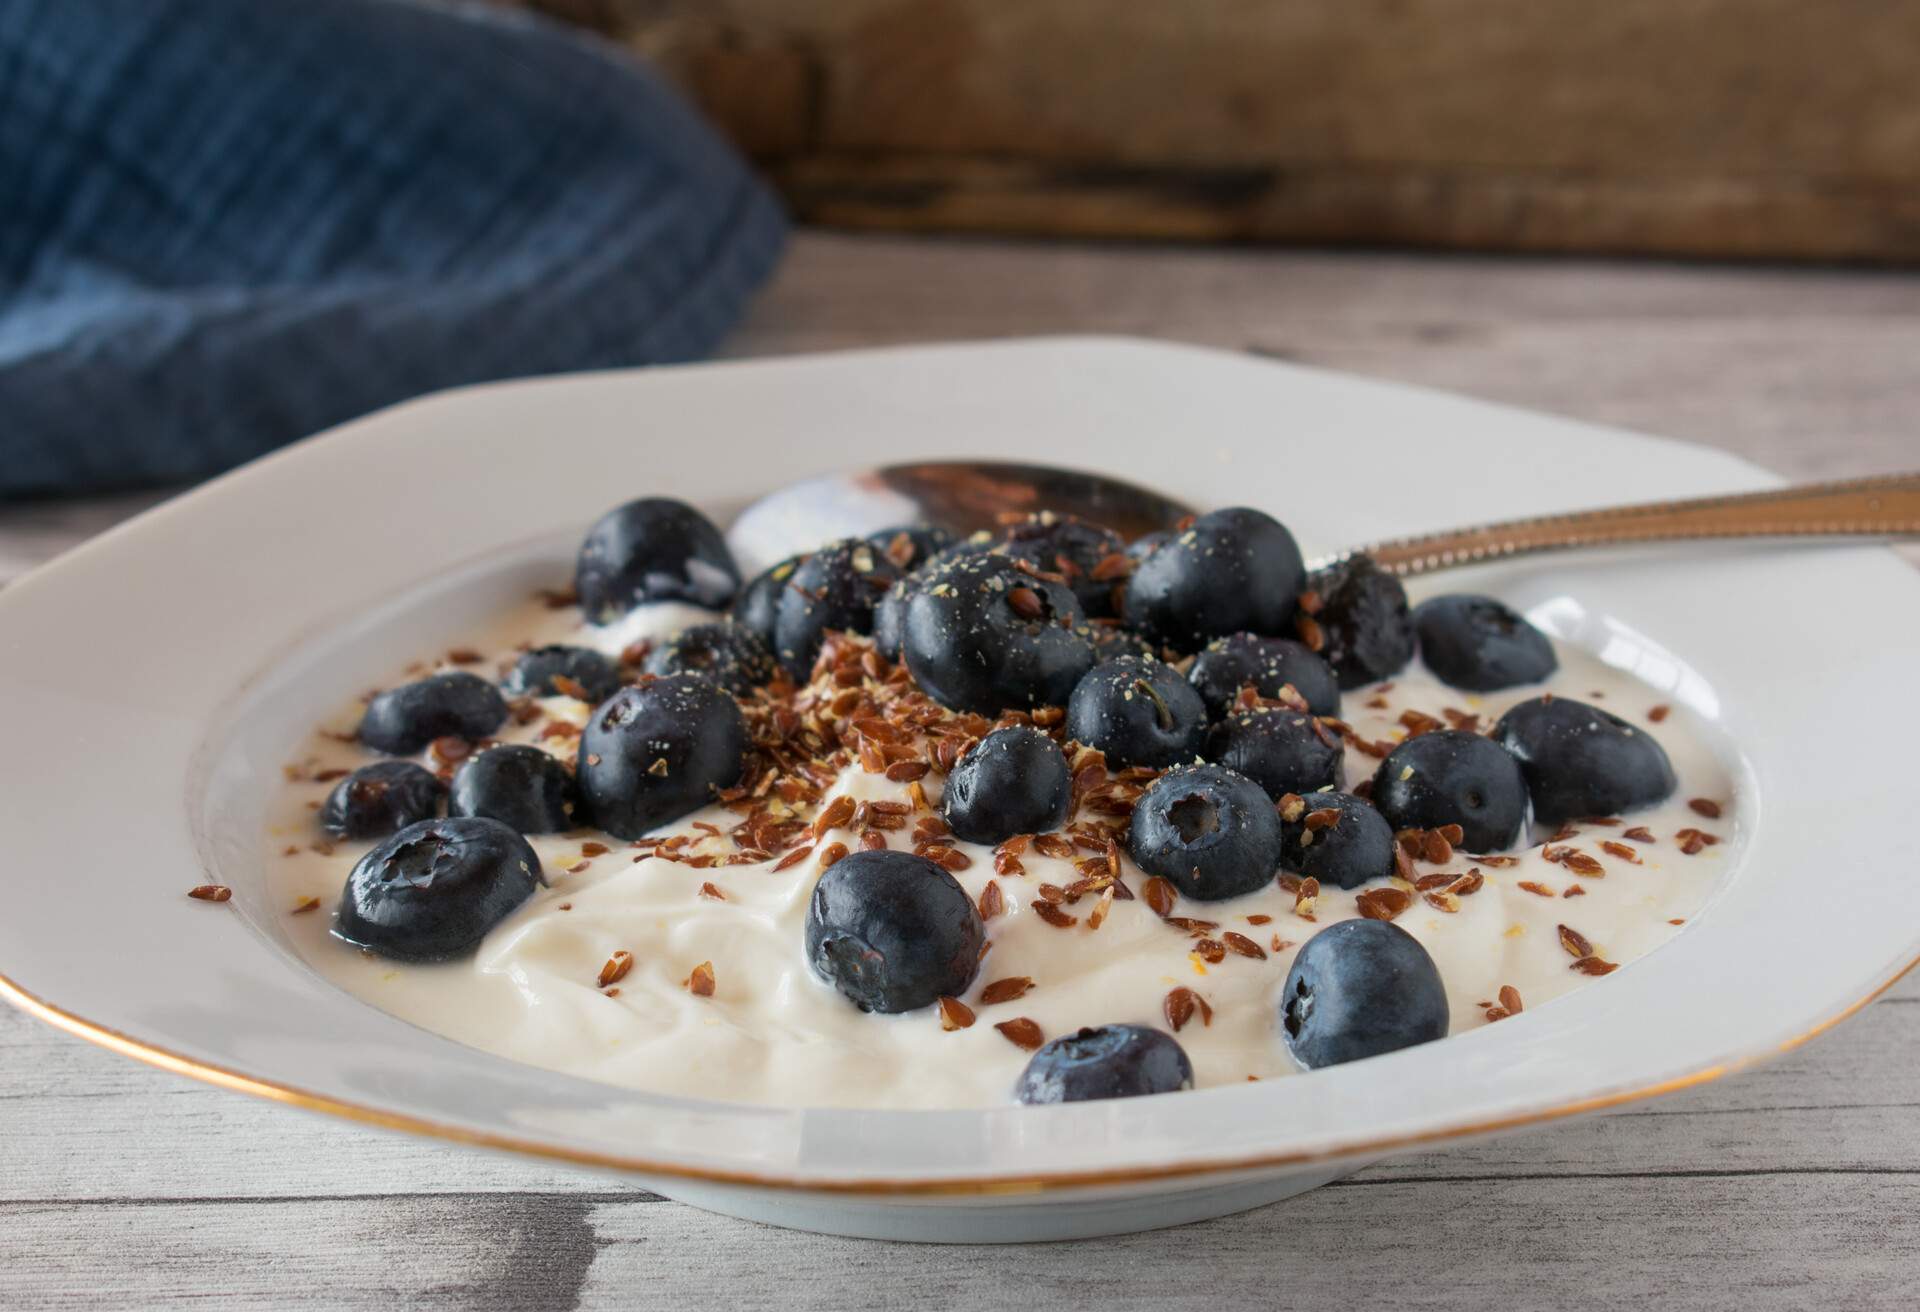 fresh and homemade high protein and low carb meal with skyr, fresh blueberries and linseeds served on a white and rustic plate with wooden table background. Front view